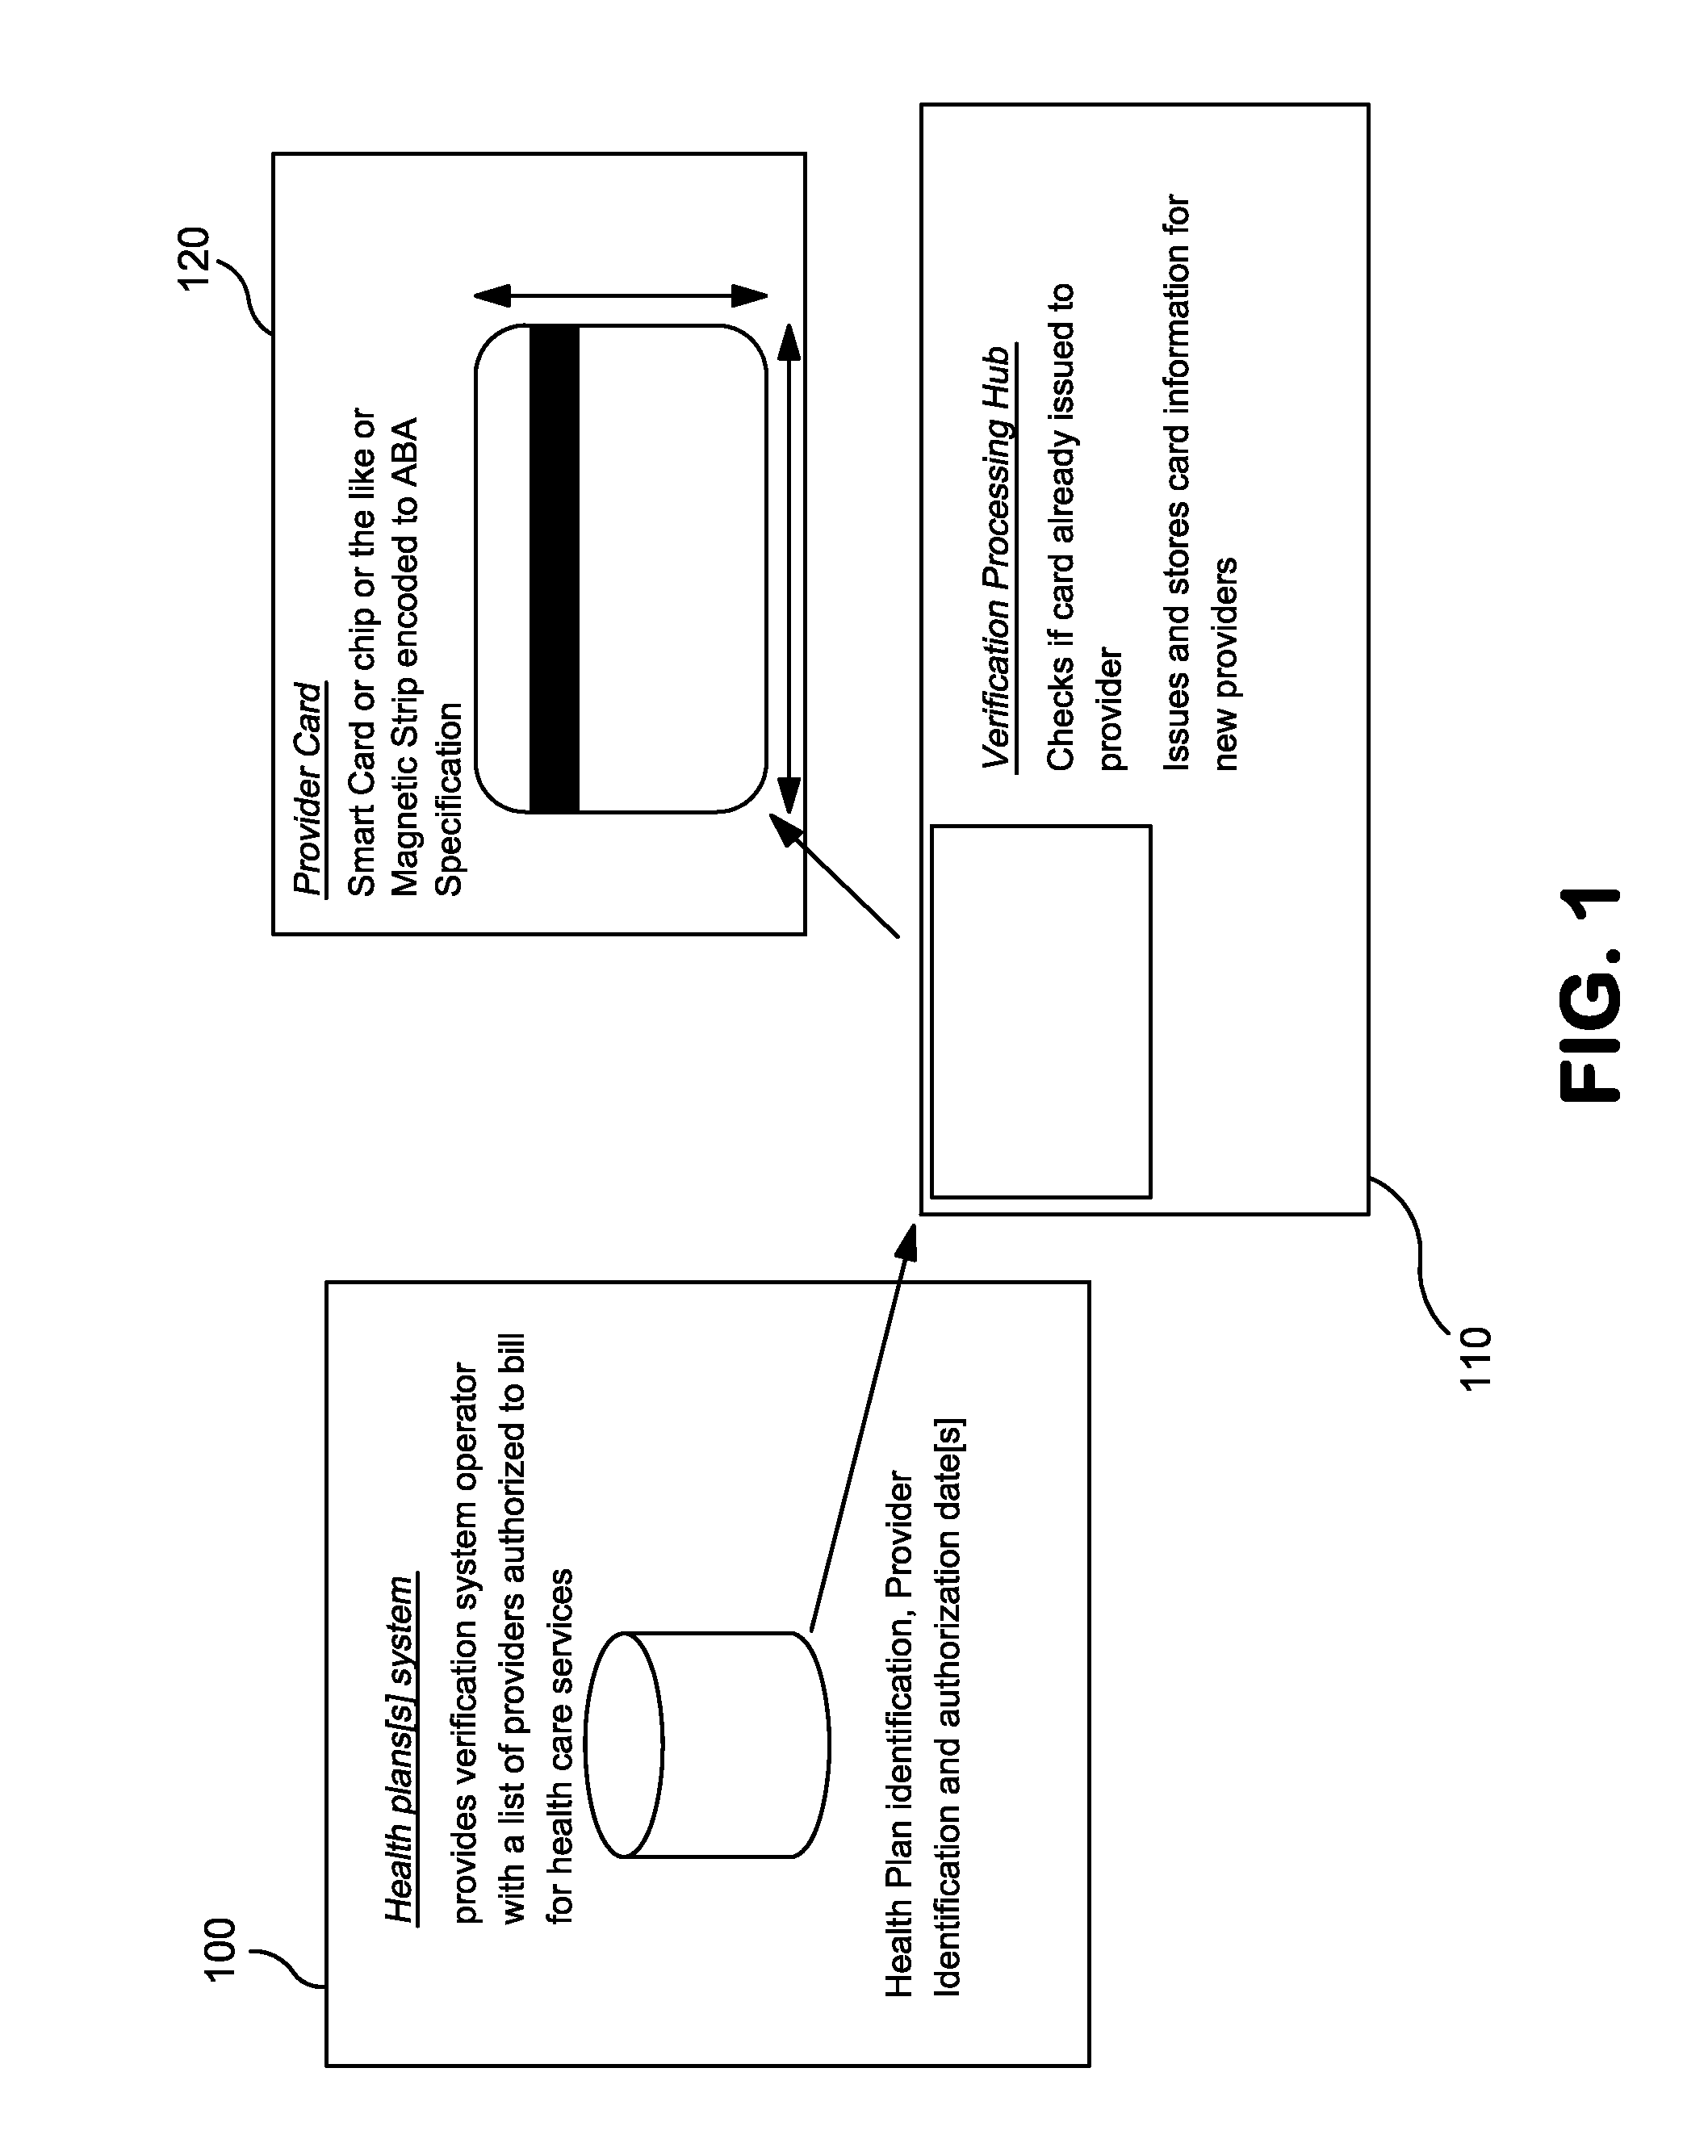 Method and system of validating and verifying health care transactions